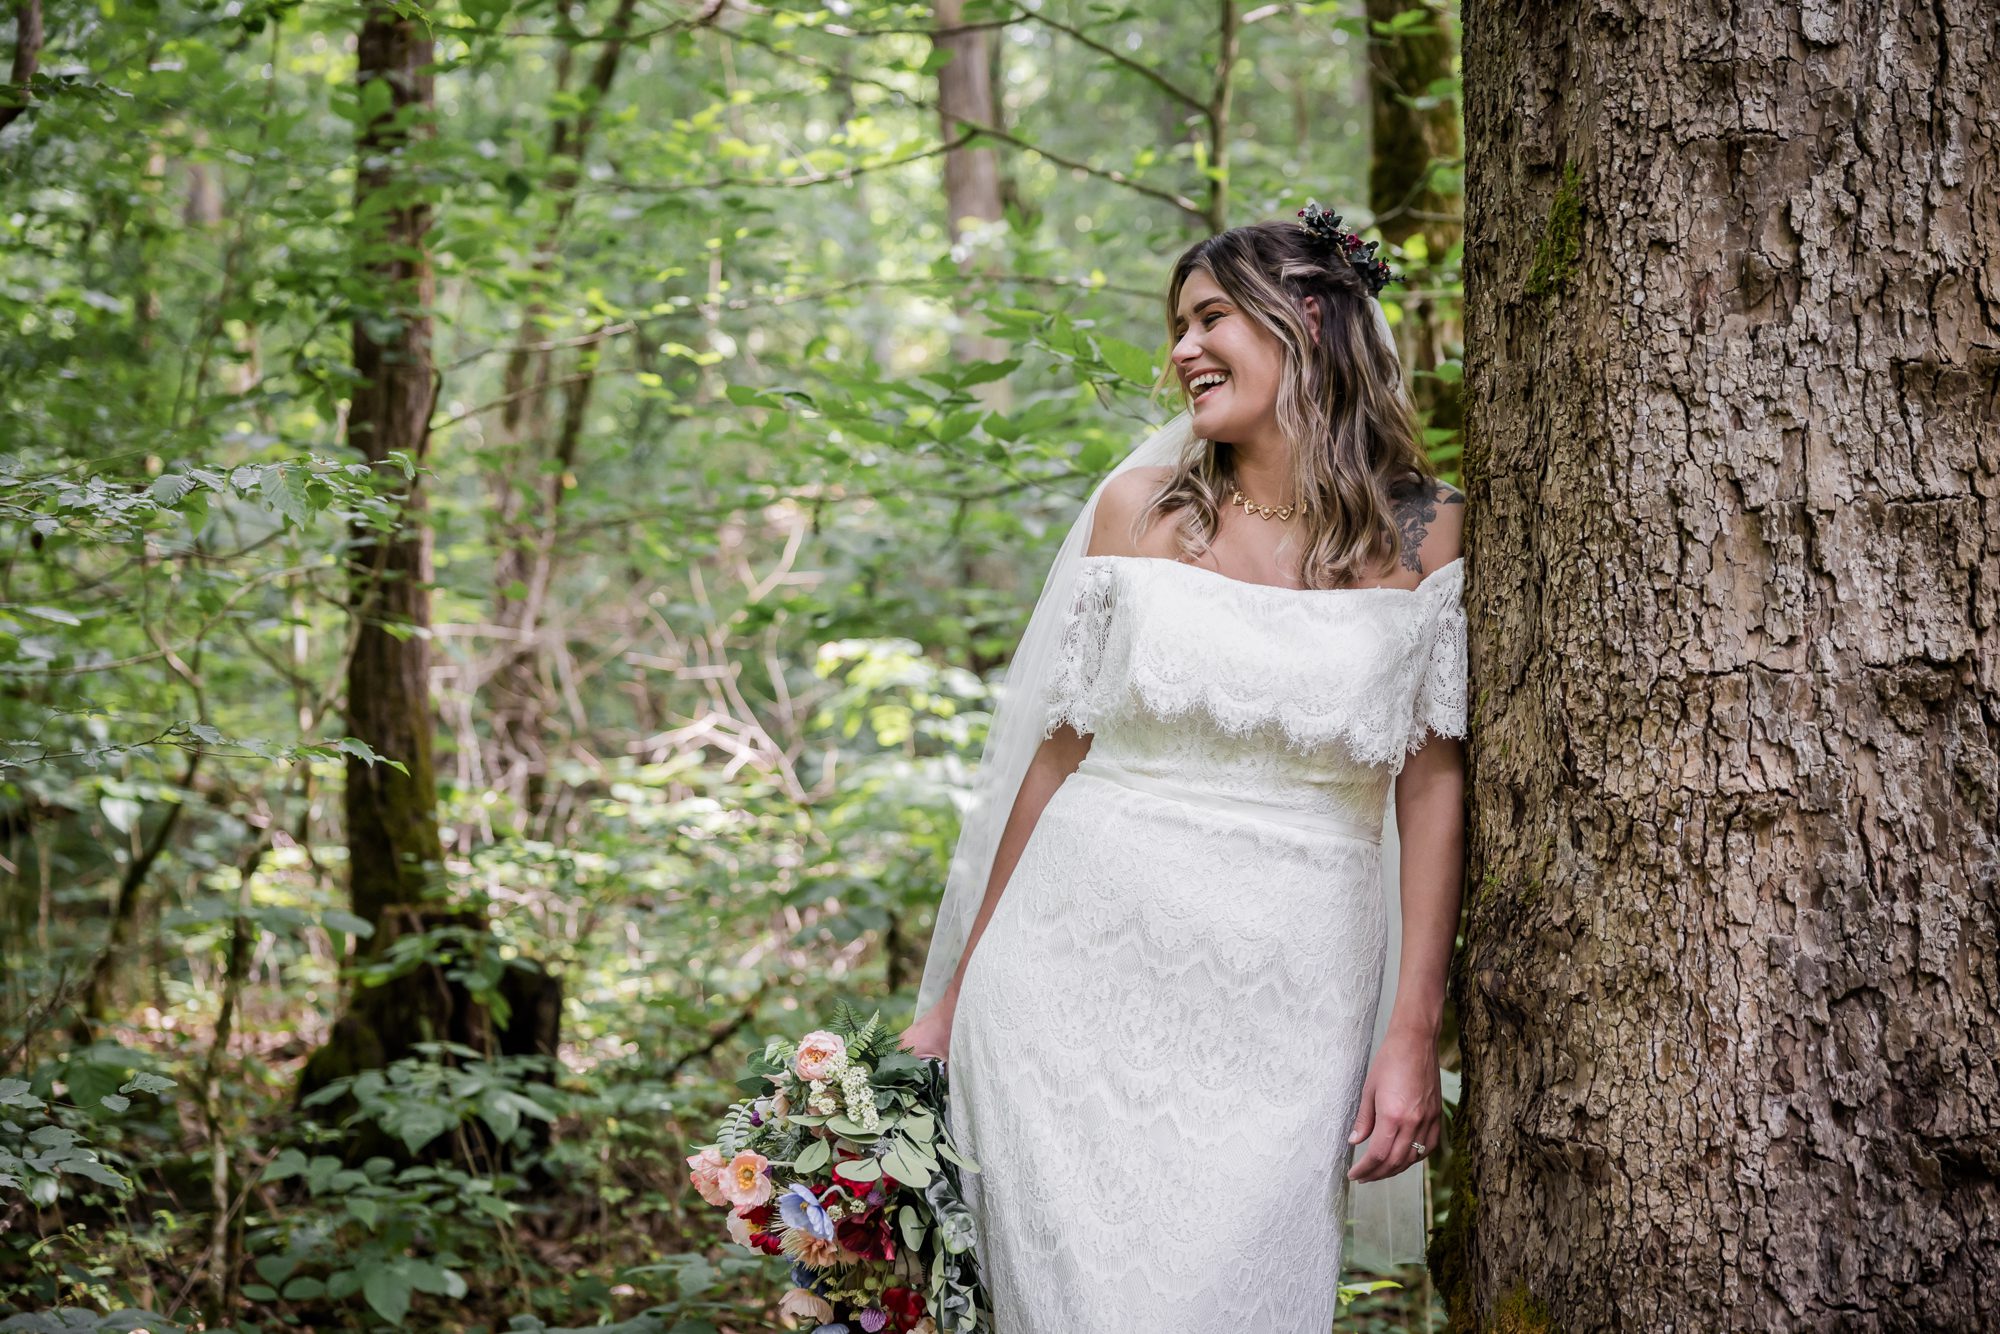 Summer Elopement in the Smoky Mountains